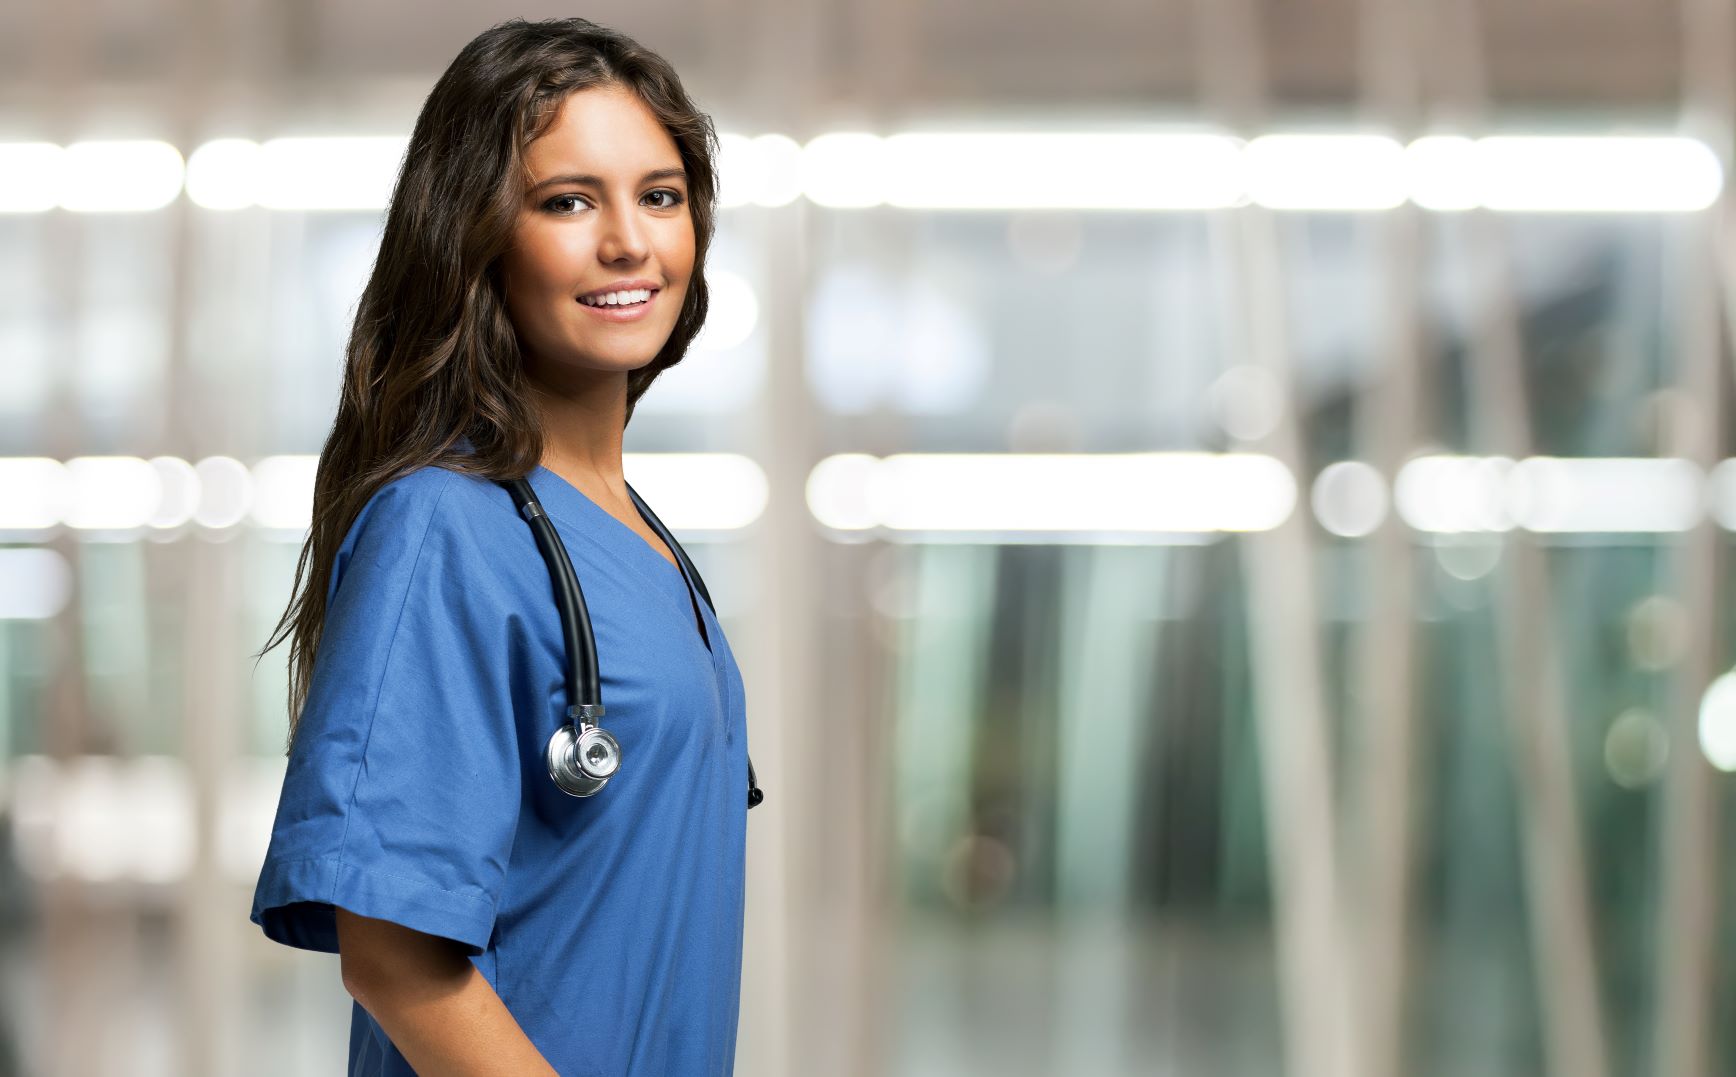 How Many Clinical Hours for Nursing School? Check the Requirements